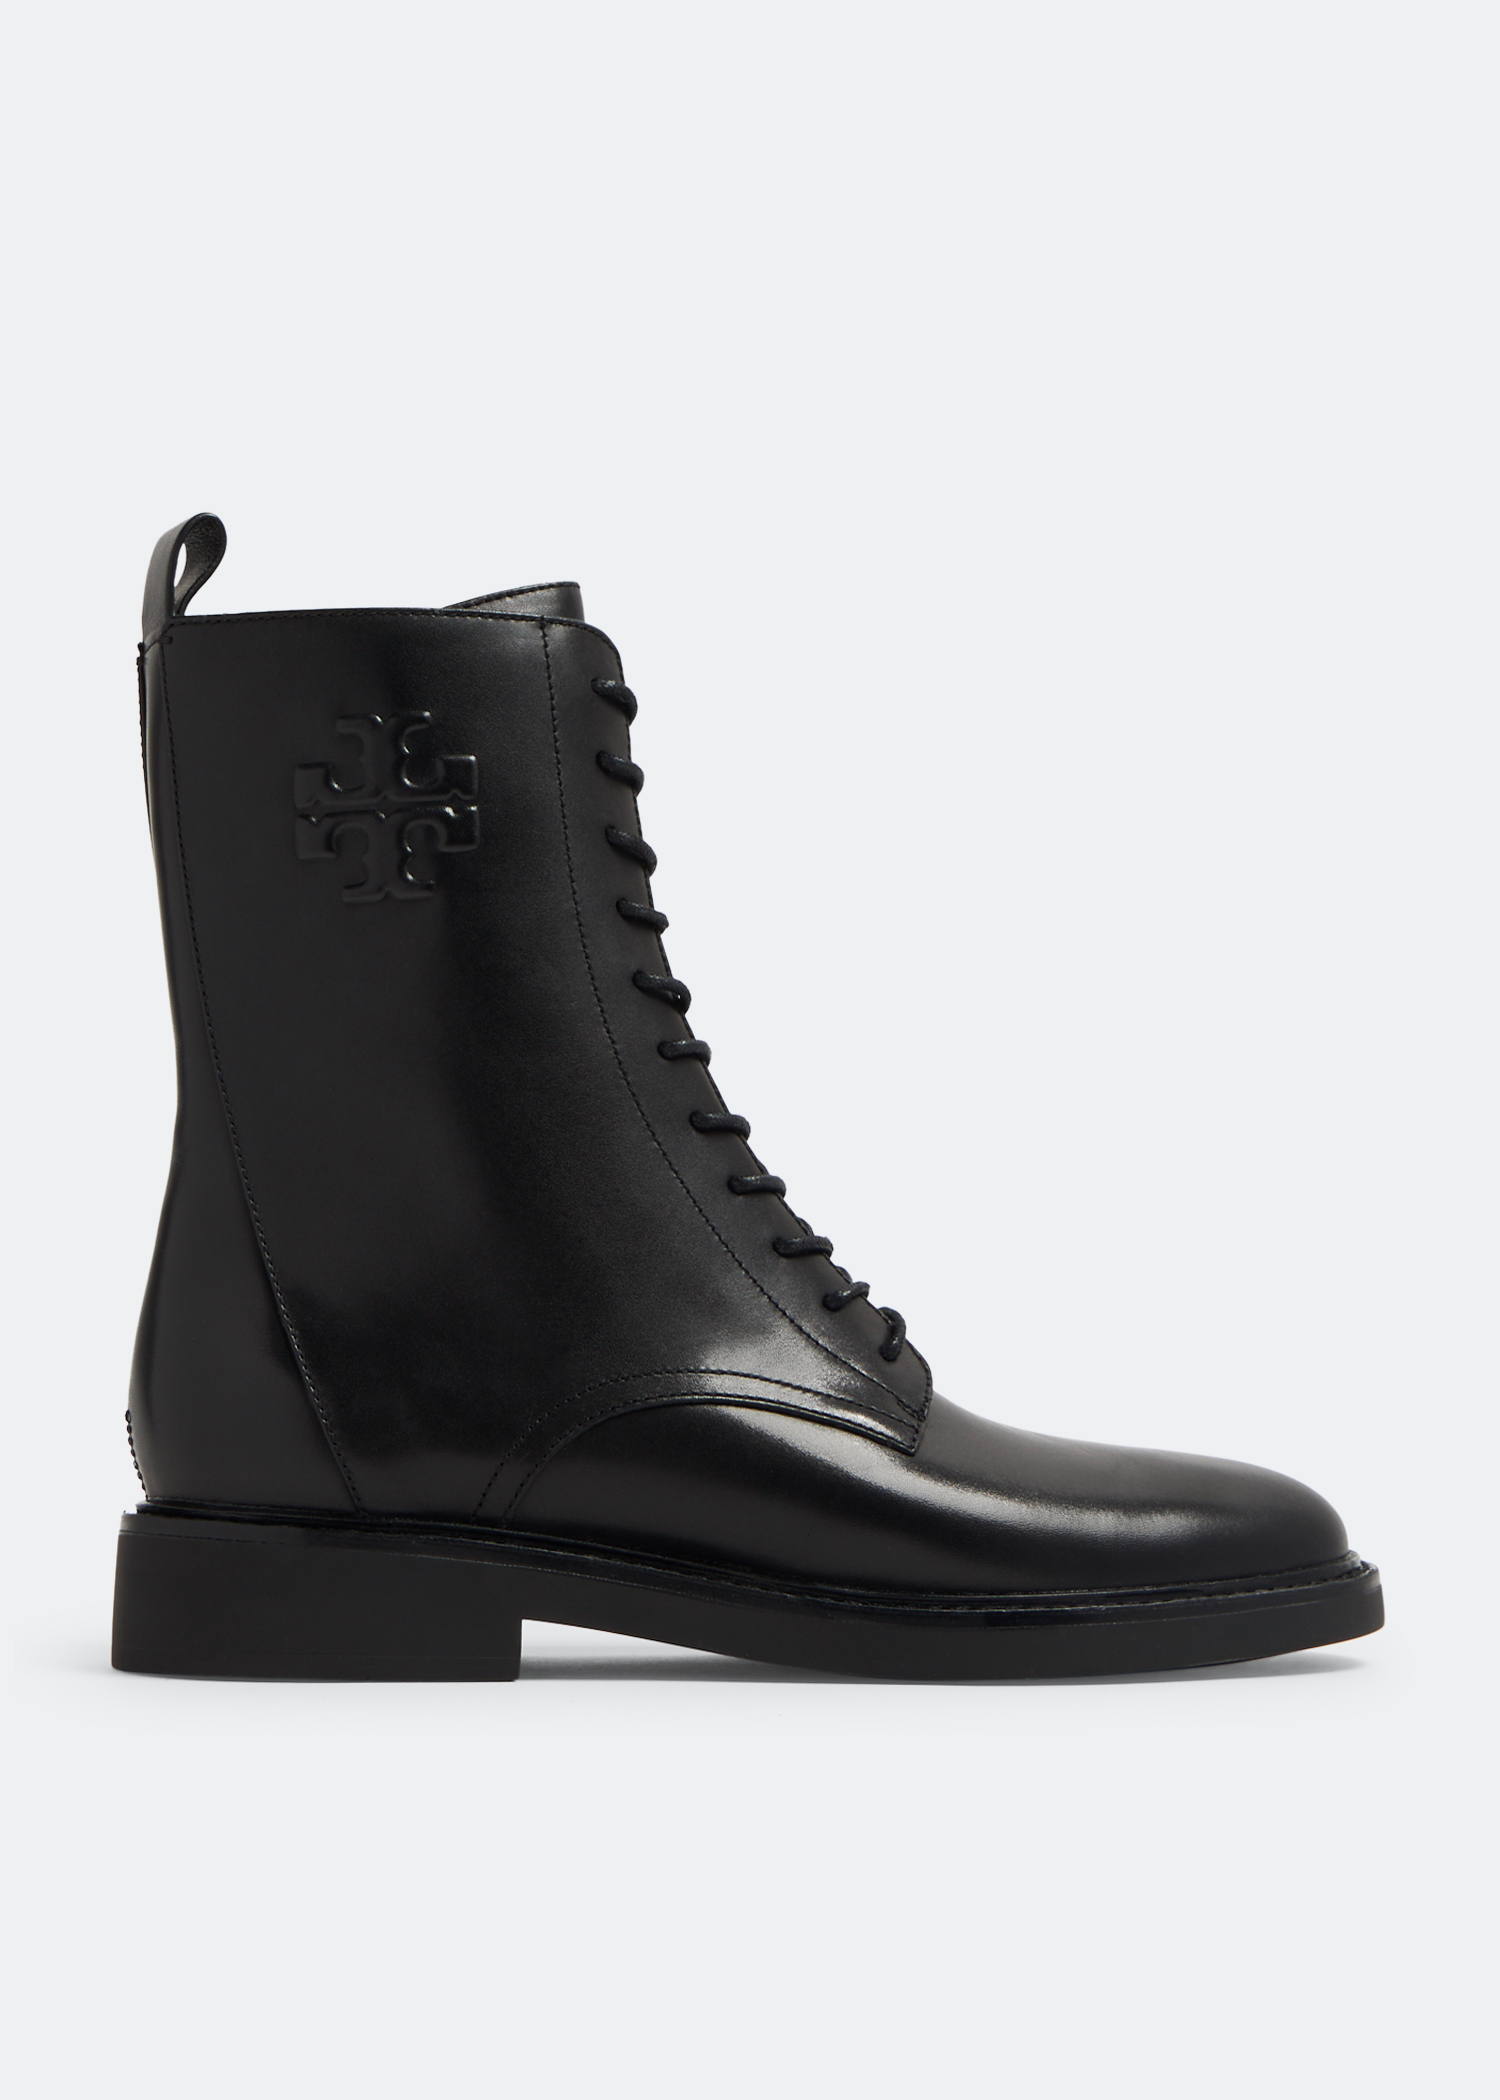 Tory Burch Double T combat boots for Women - Black in UAE | Level